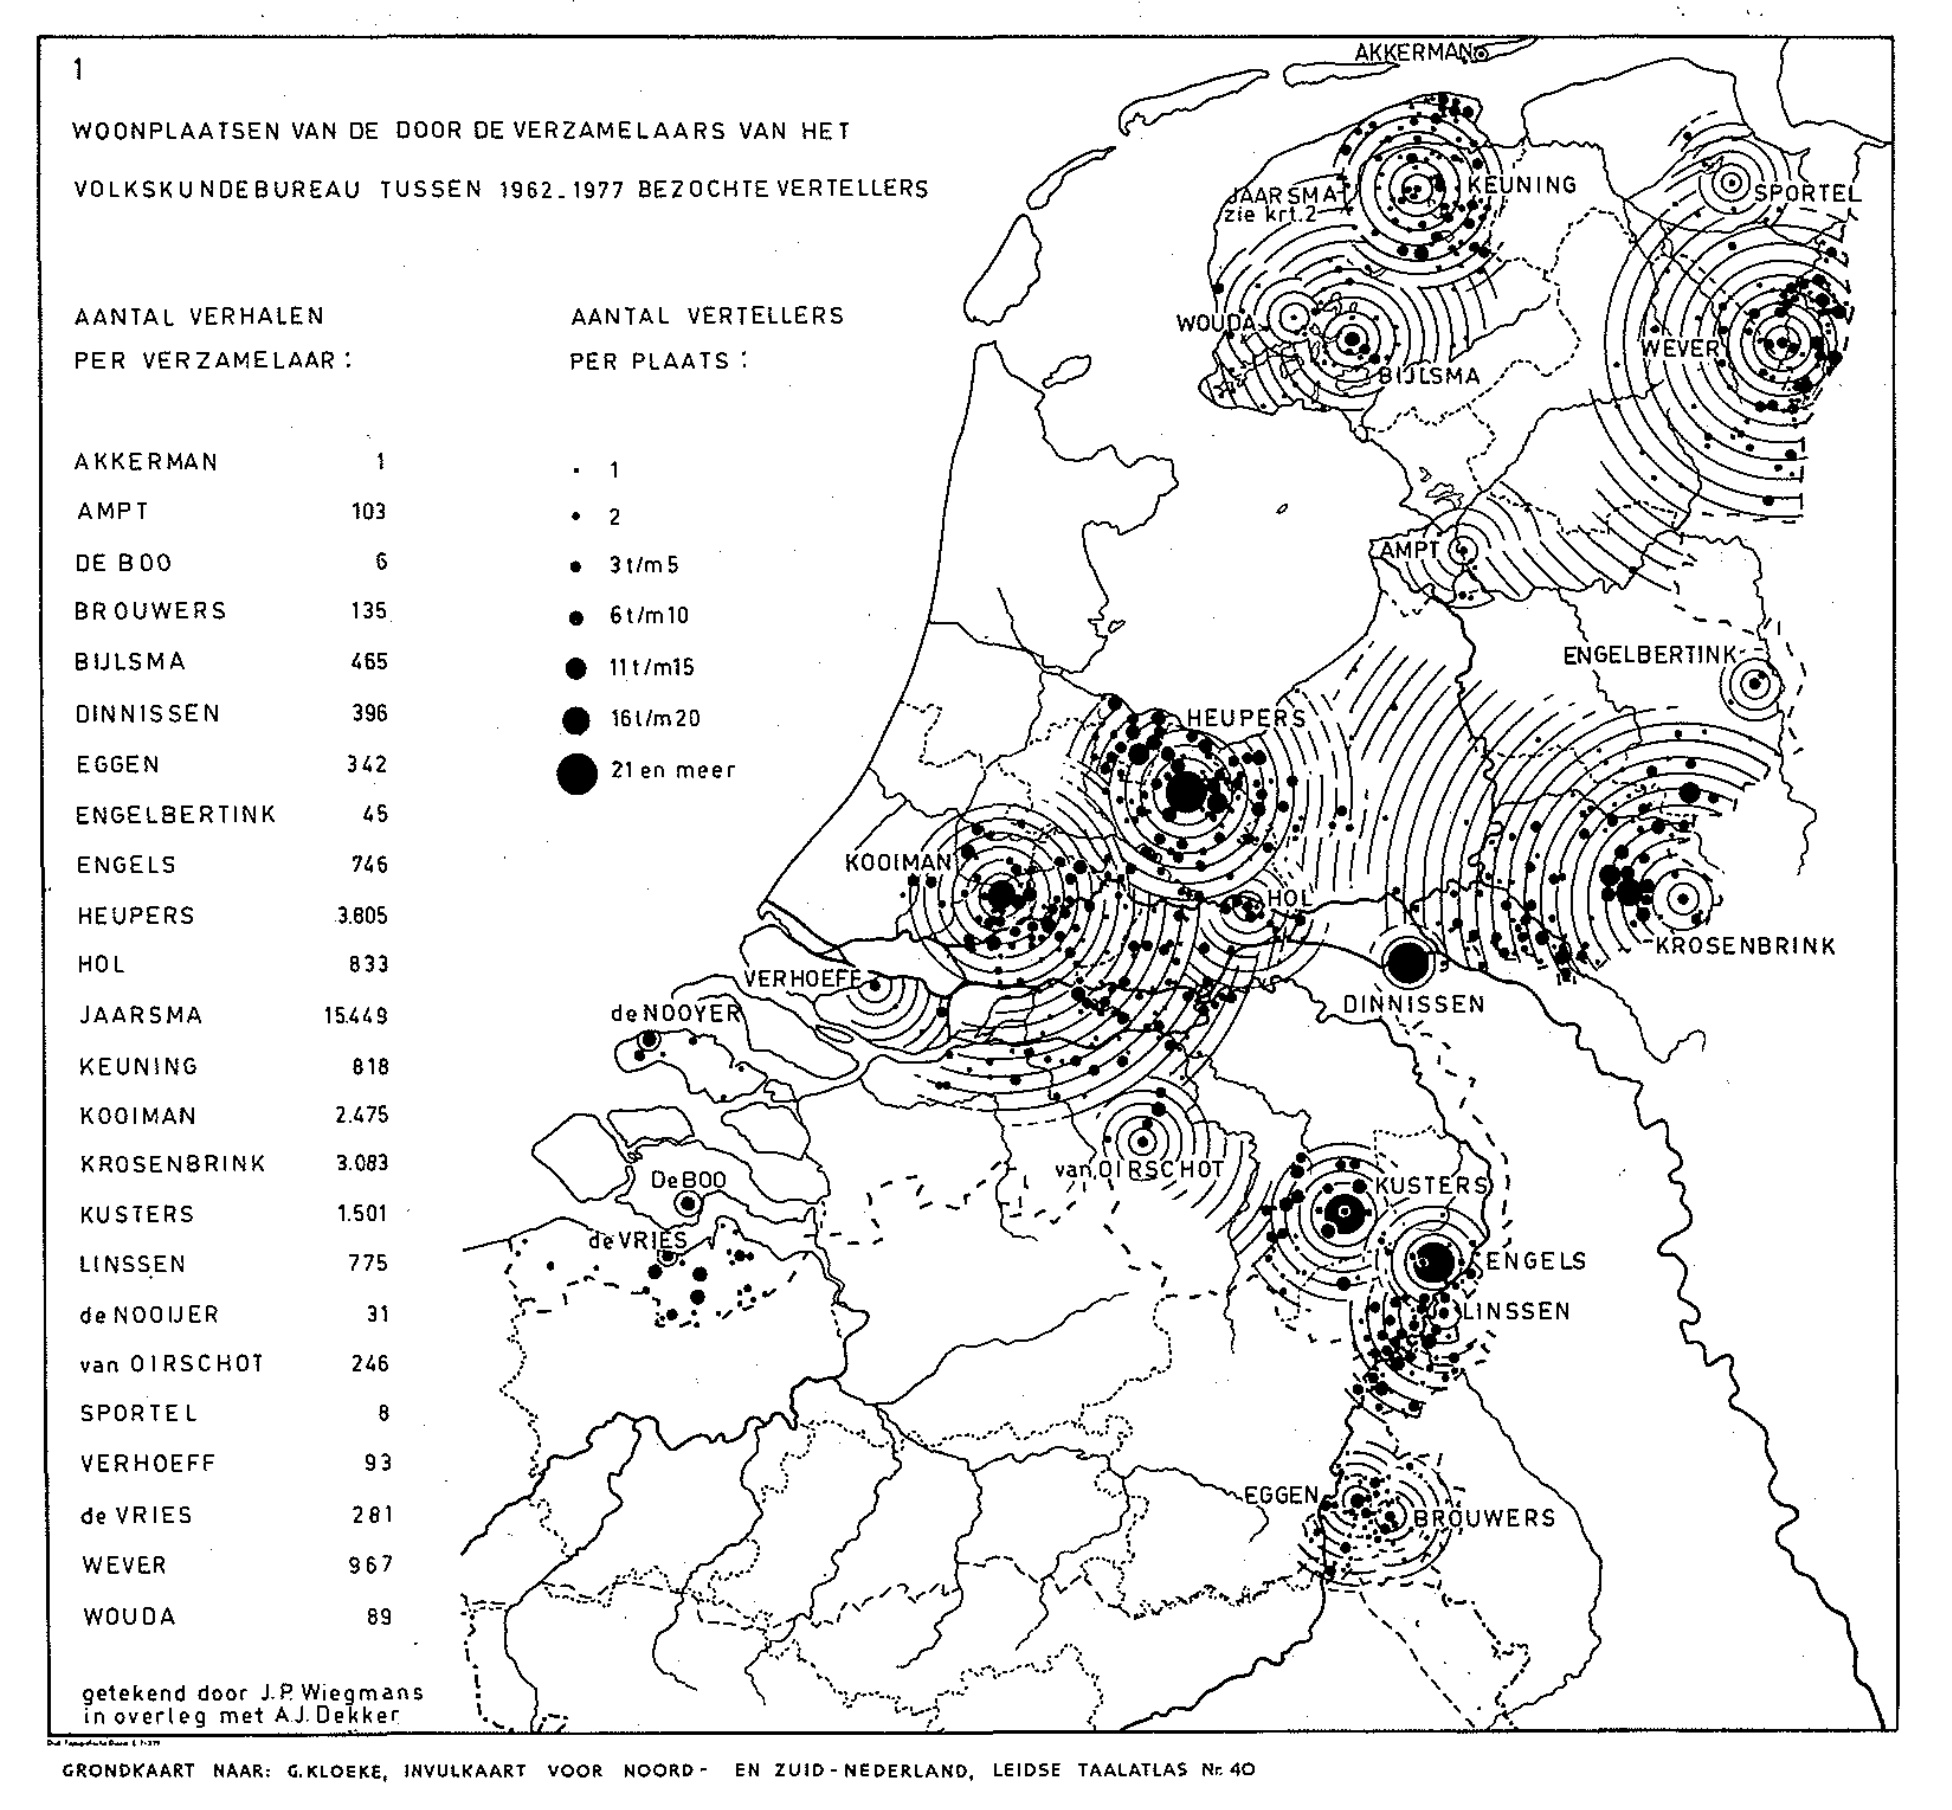 Figure 1: Map by A.J. Dekker showing the residences of the narrators visited by the collectors of the Folklore Bureau between 1962 and 1977.